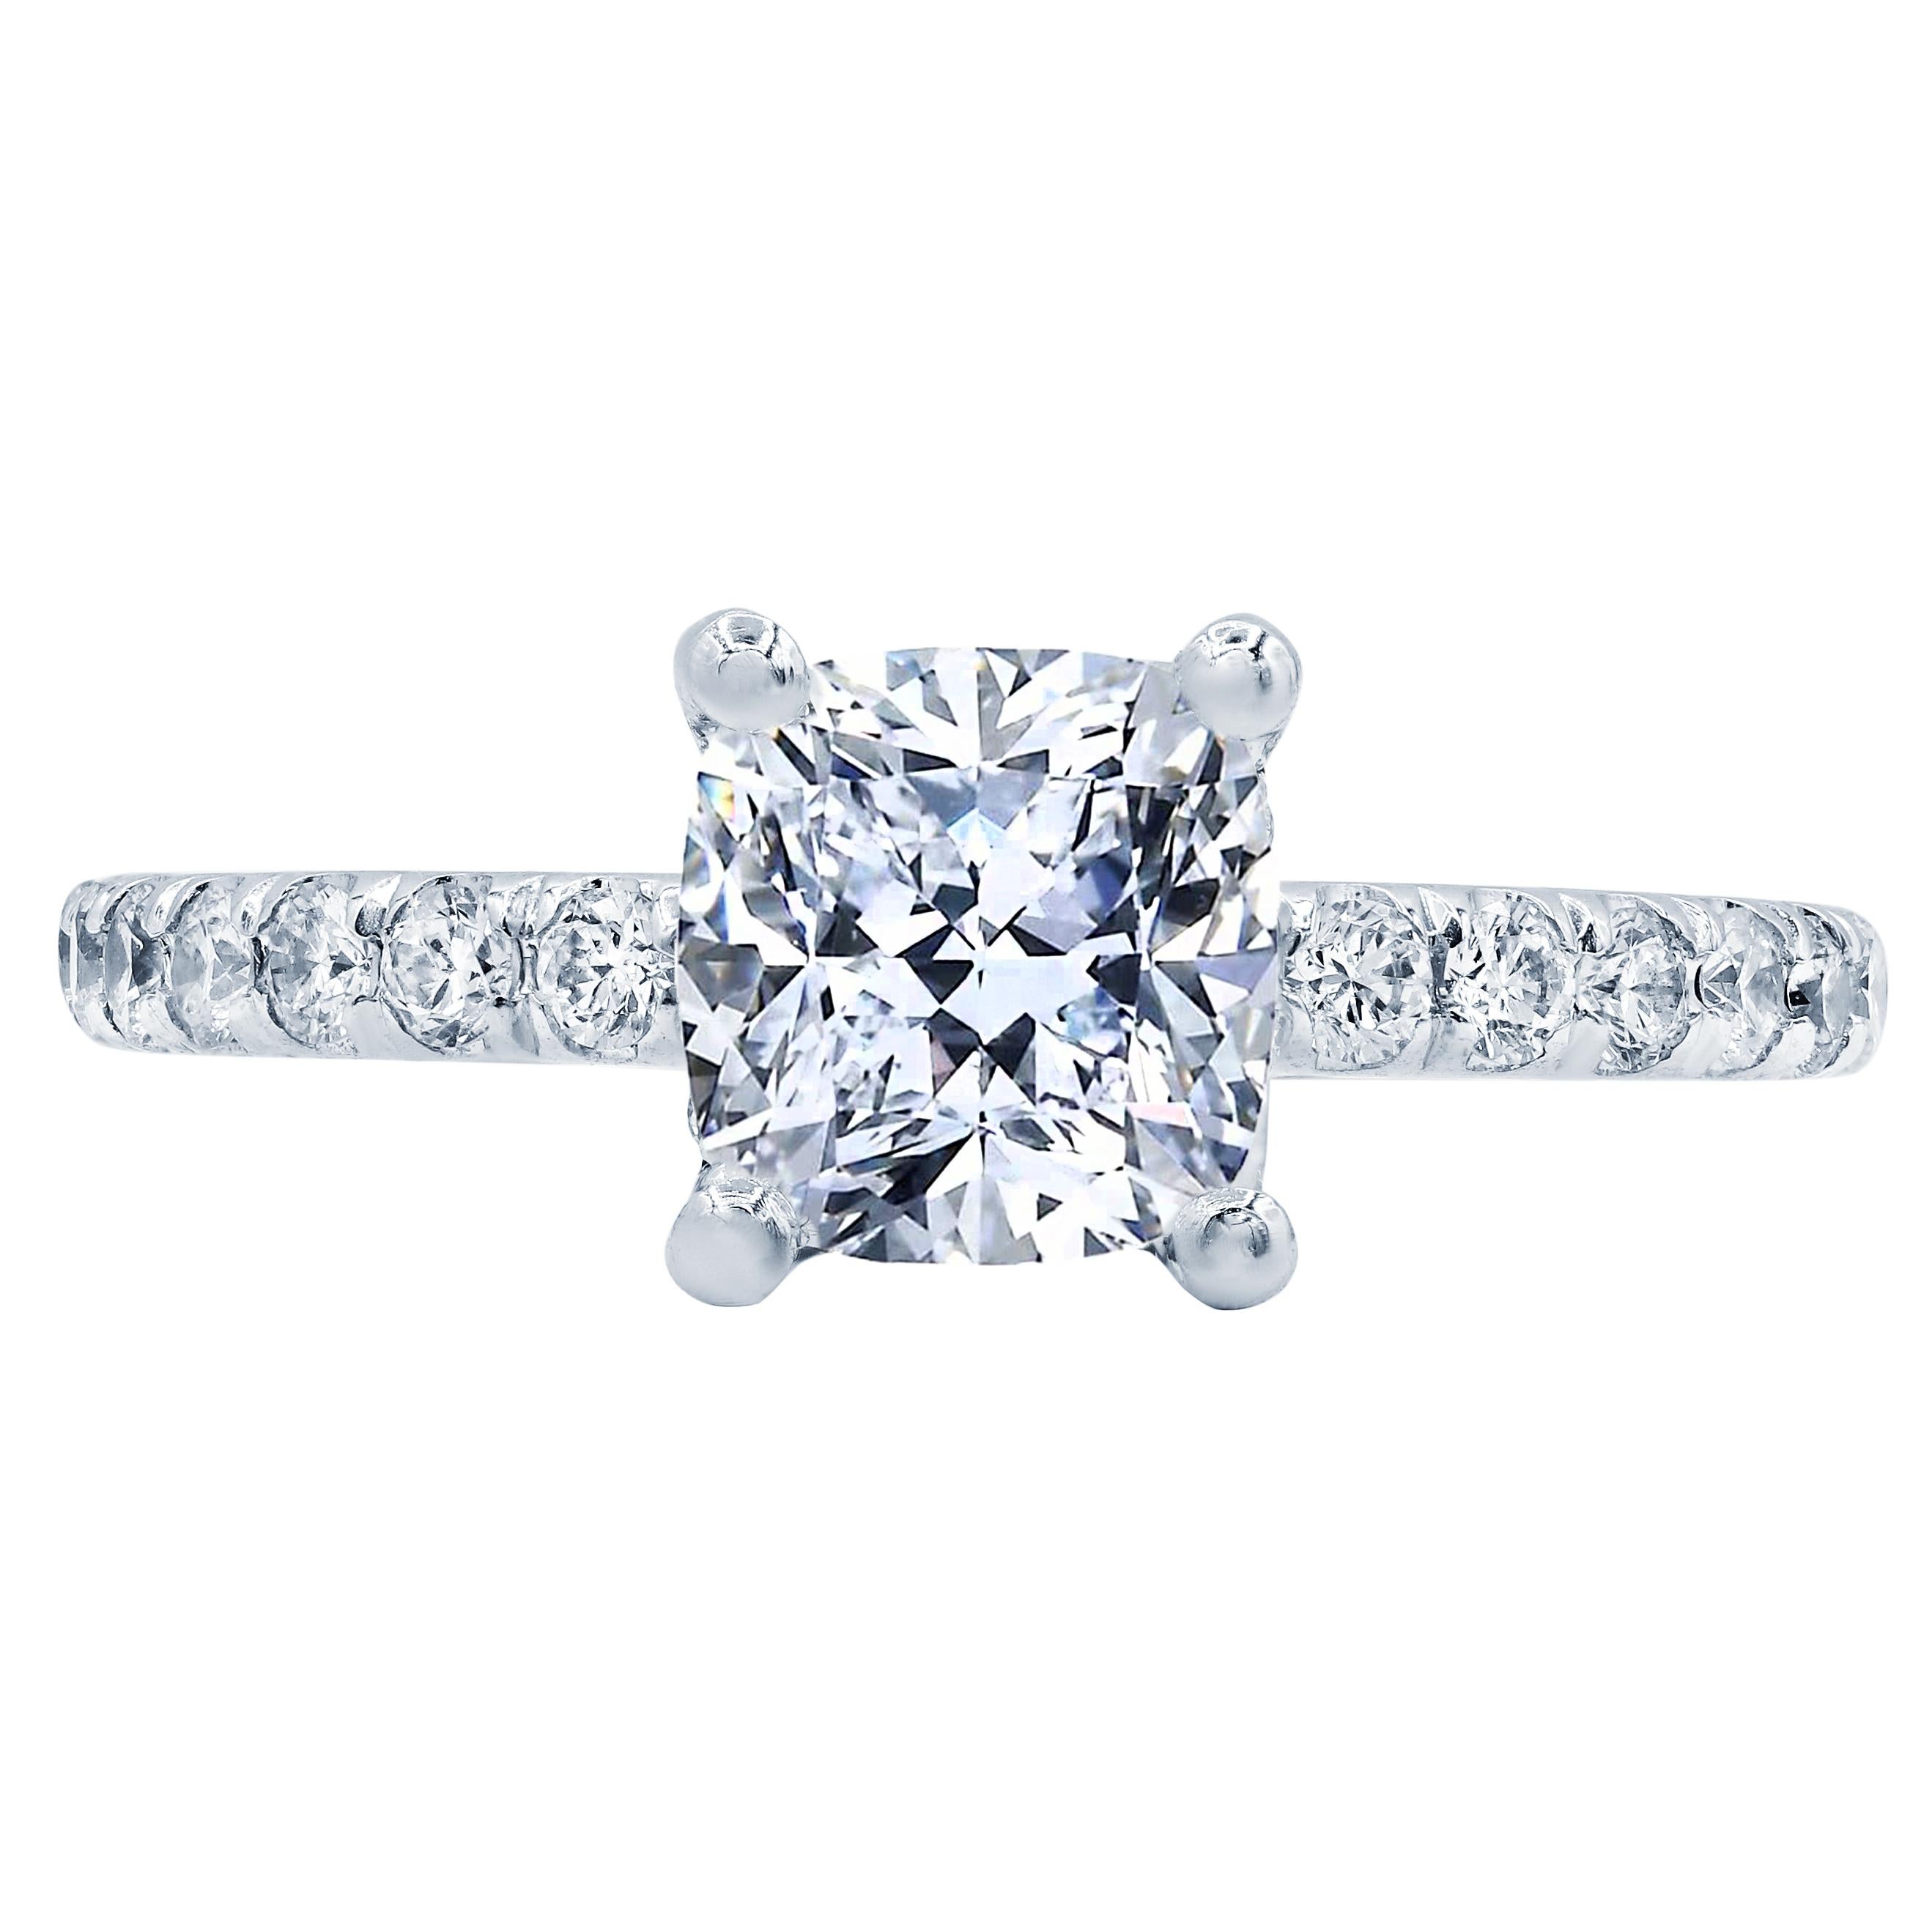 18 Karat White Gold Classic Engagement Ring with Cushion Cut and Round Diamonds